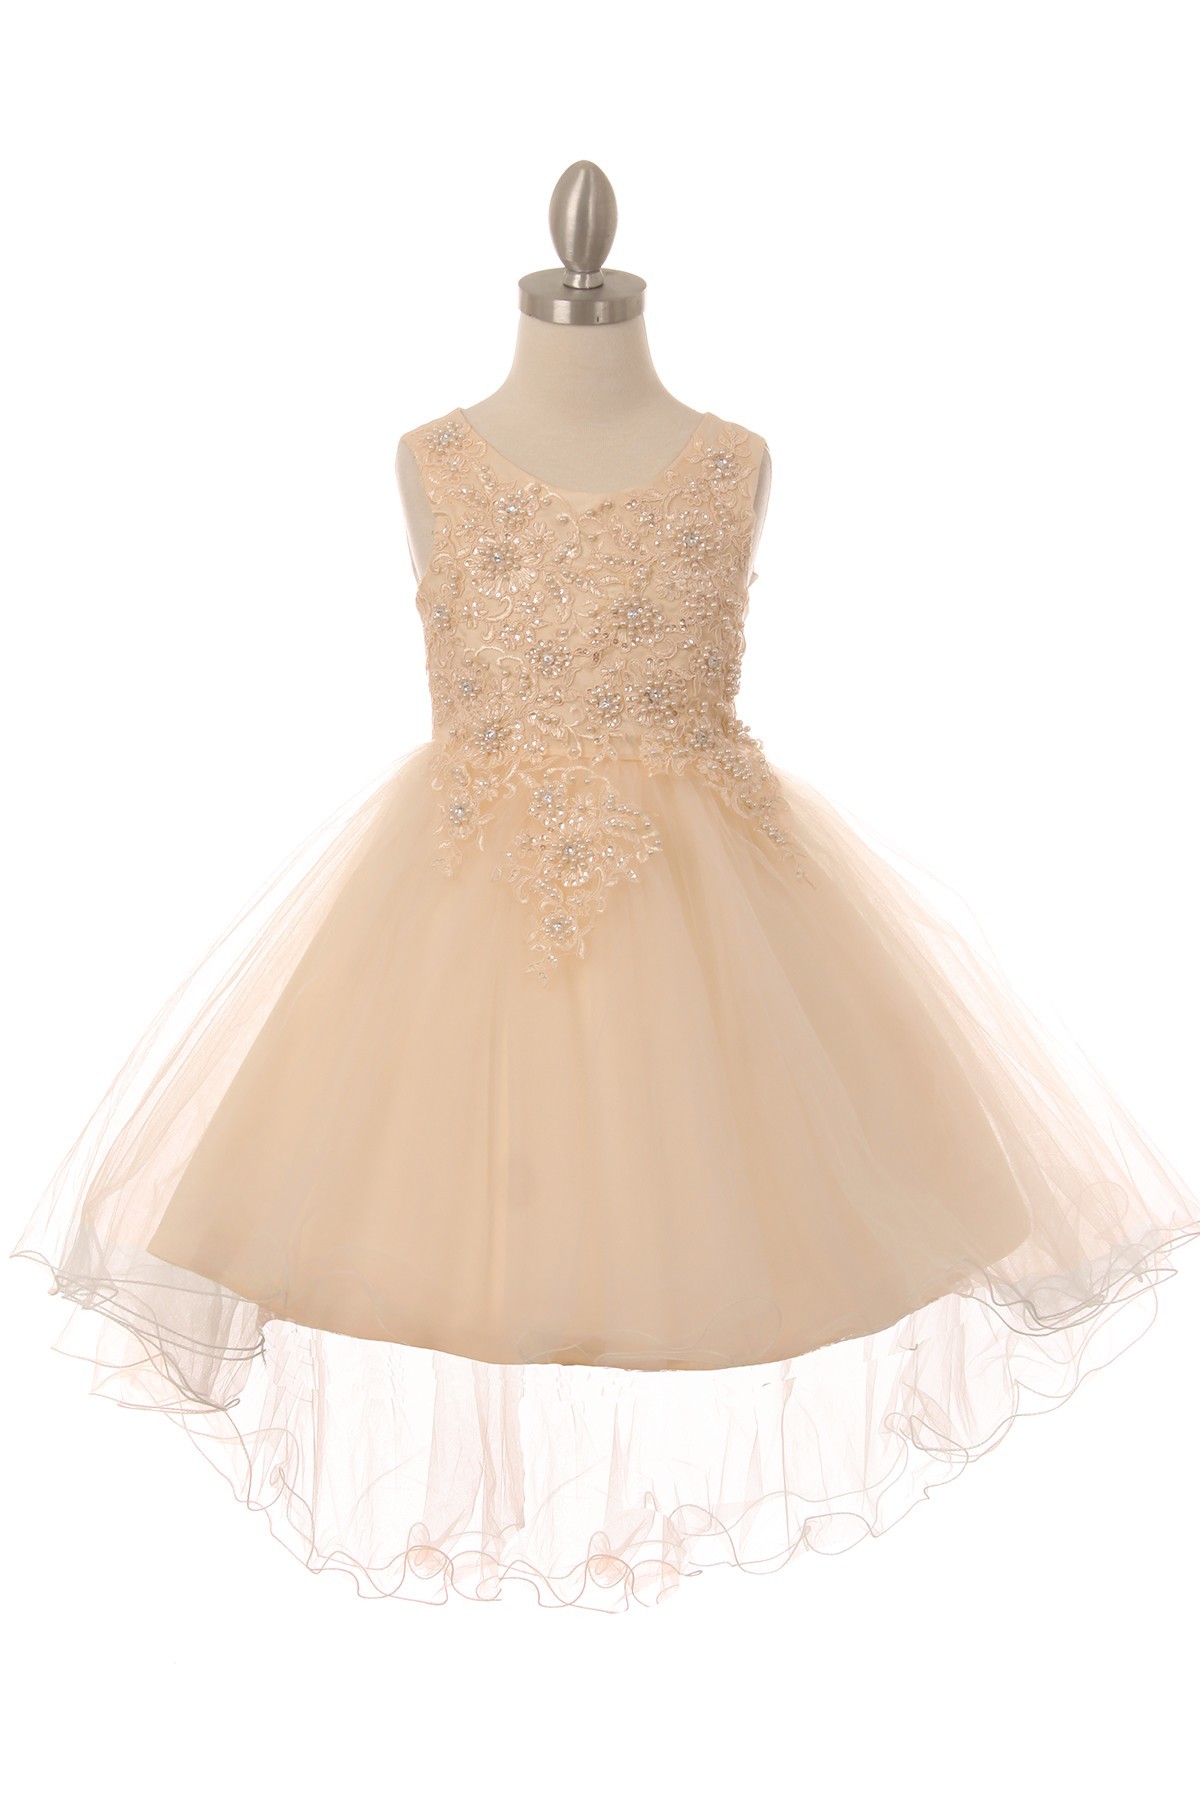 Sleeveless champagne tulle and lace dress, with pearls and sparkling rhinestones, and wired hem.